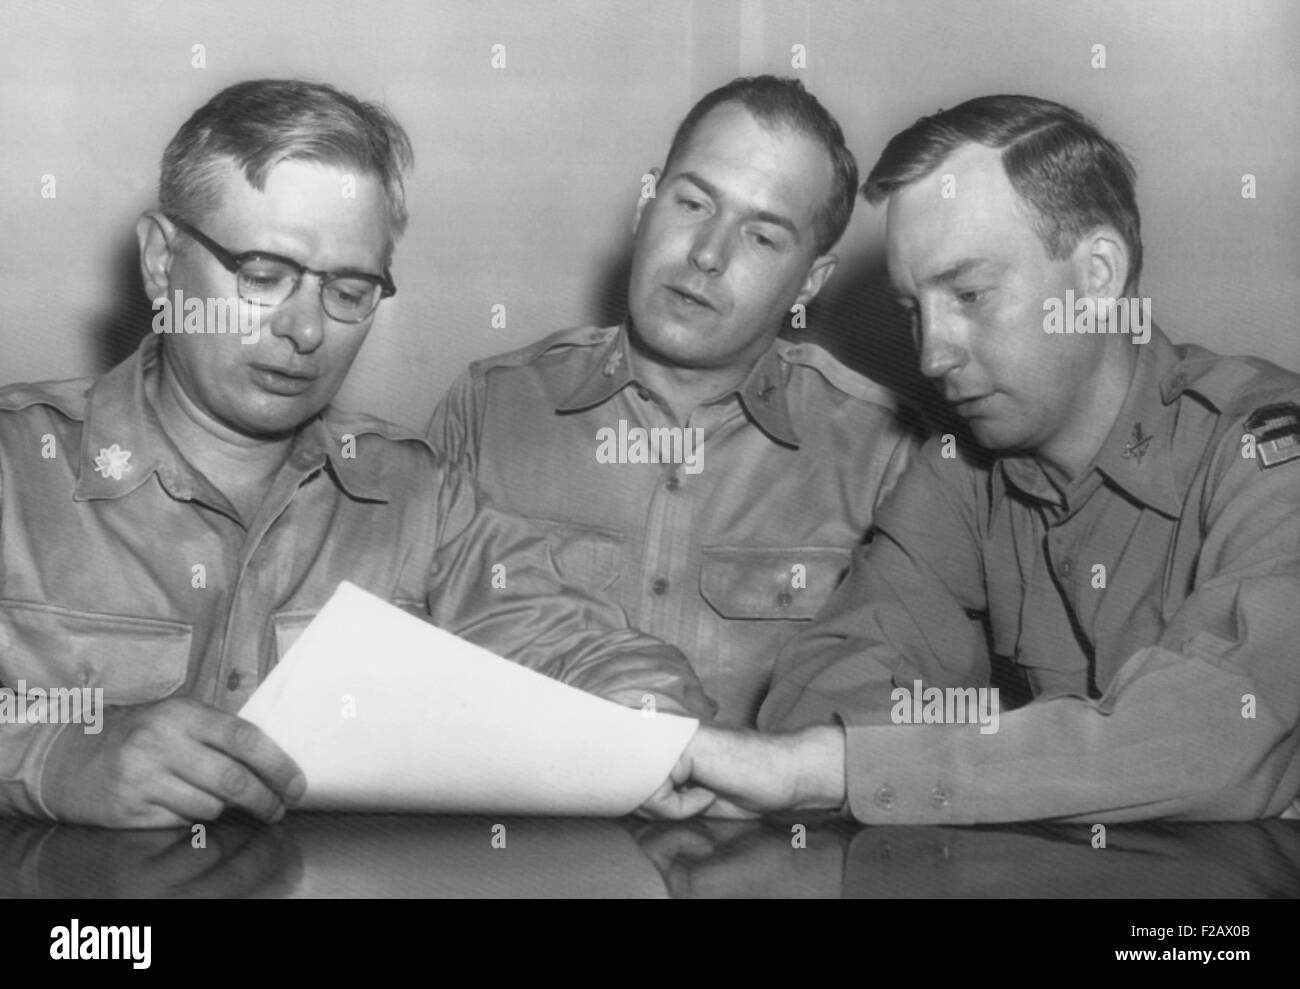 Major Roland E. Alley (center), a 14 year Army veteran, charged misconduct as a Korean War POW. August 22, 1955. His lawyer, Col. William T. Logan, warned that he was being singled out as a scapegoat while the Army was under pressure for being 'soft on Communism' by Joseph McCarthy. Convicted, he served 3.5 years in Leavenworth. In Sept. 1973, as a successful surveyor in Maine, he sought to have his case reviewed. (CSU 2015 11 1194) Stock Photo